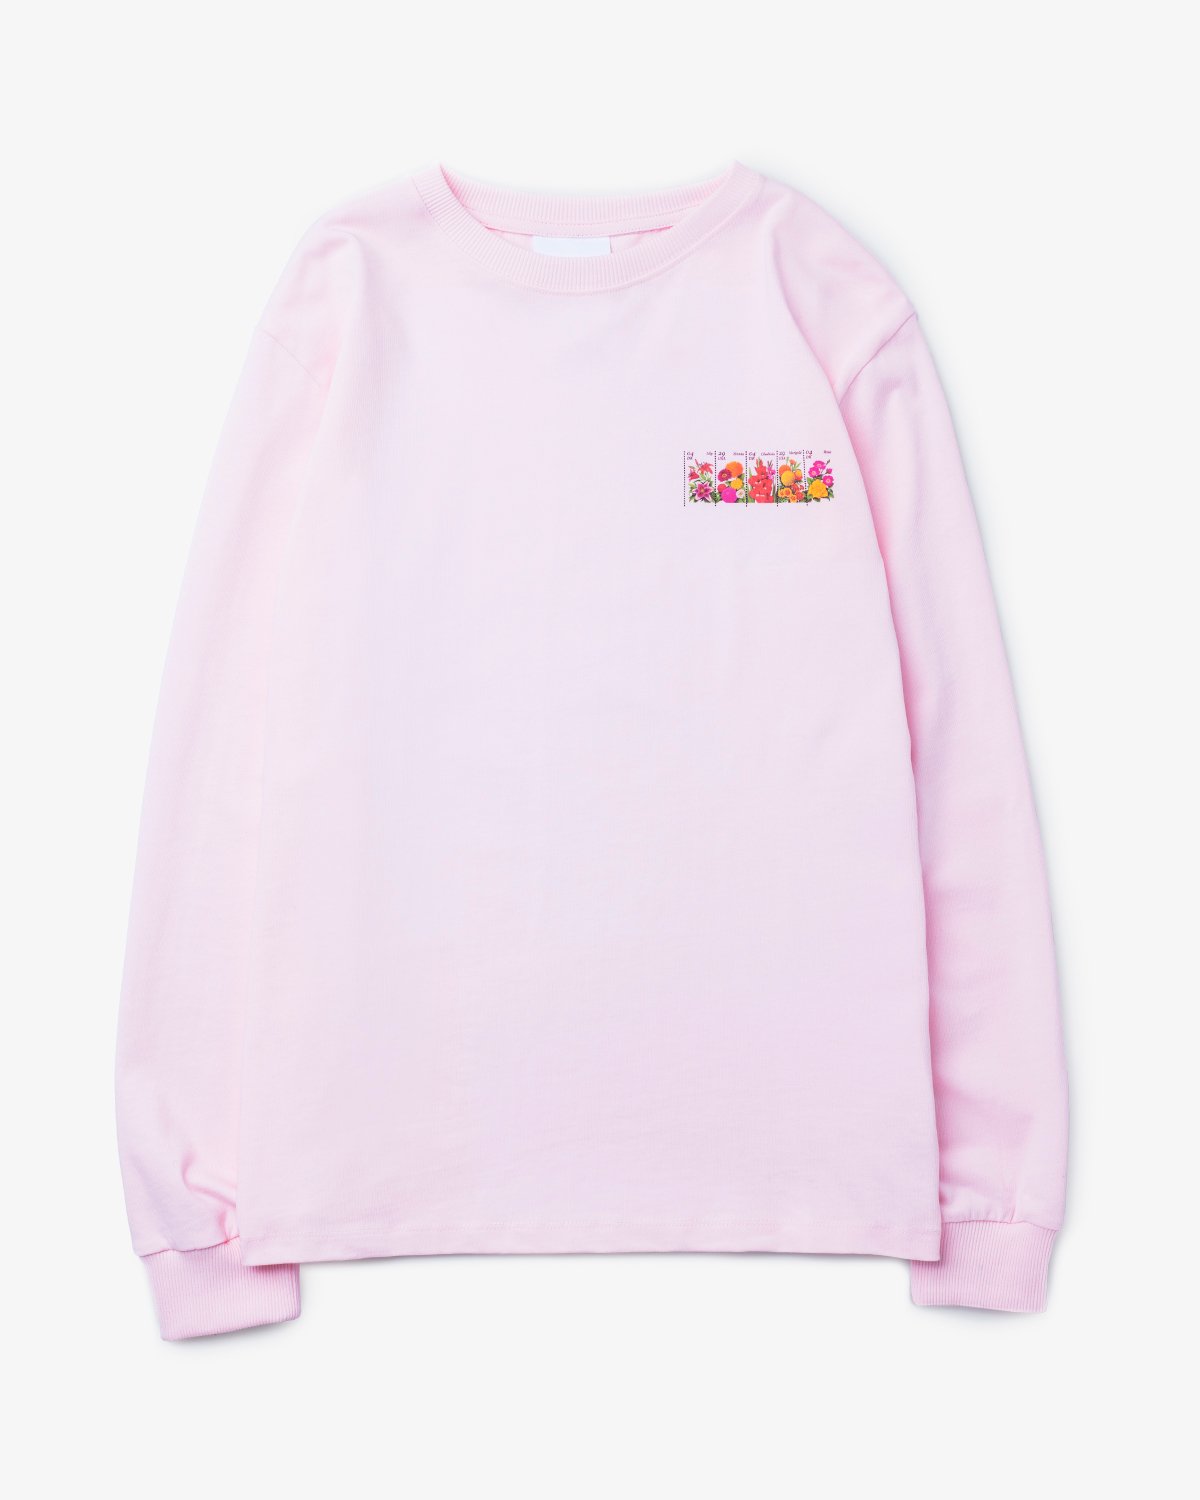 Soulland - Boas L/S Pink - Clothing - Pink - Image 2